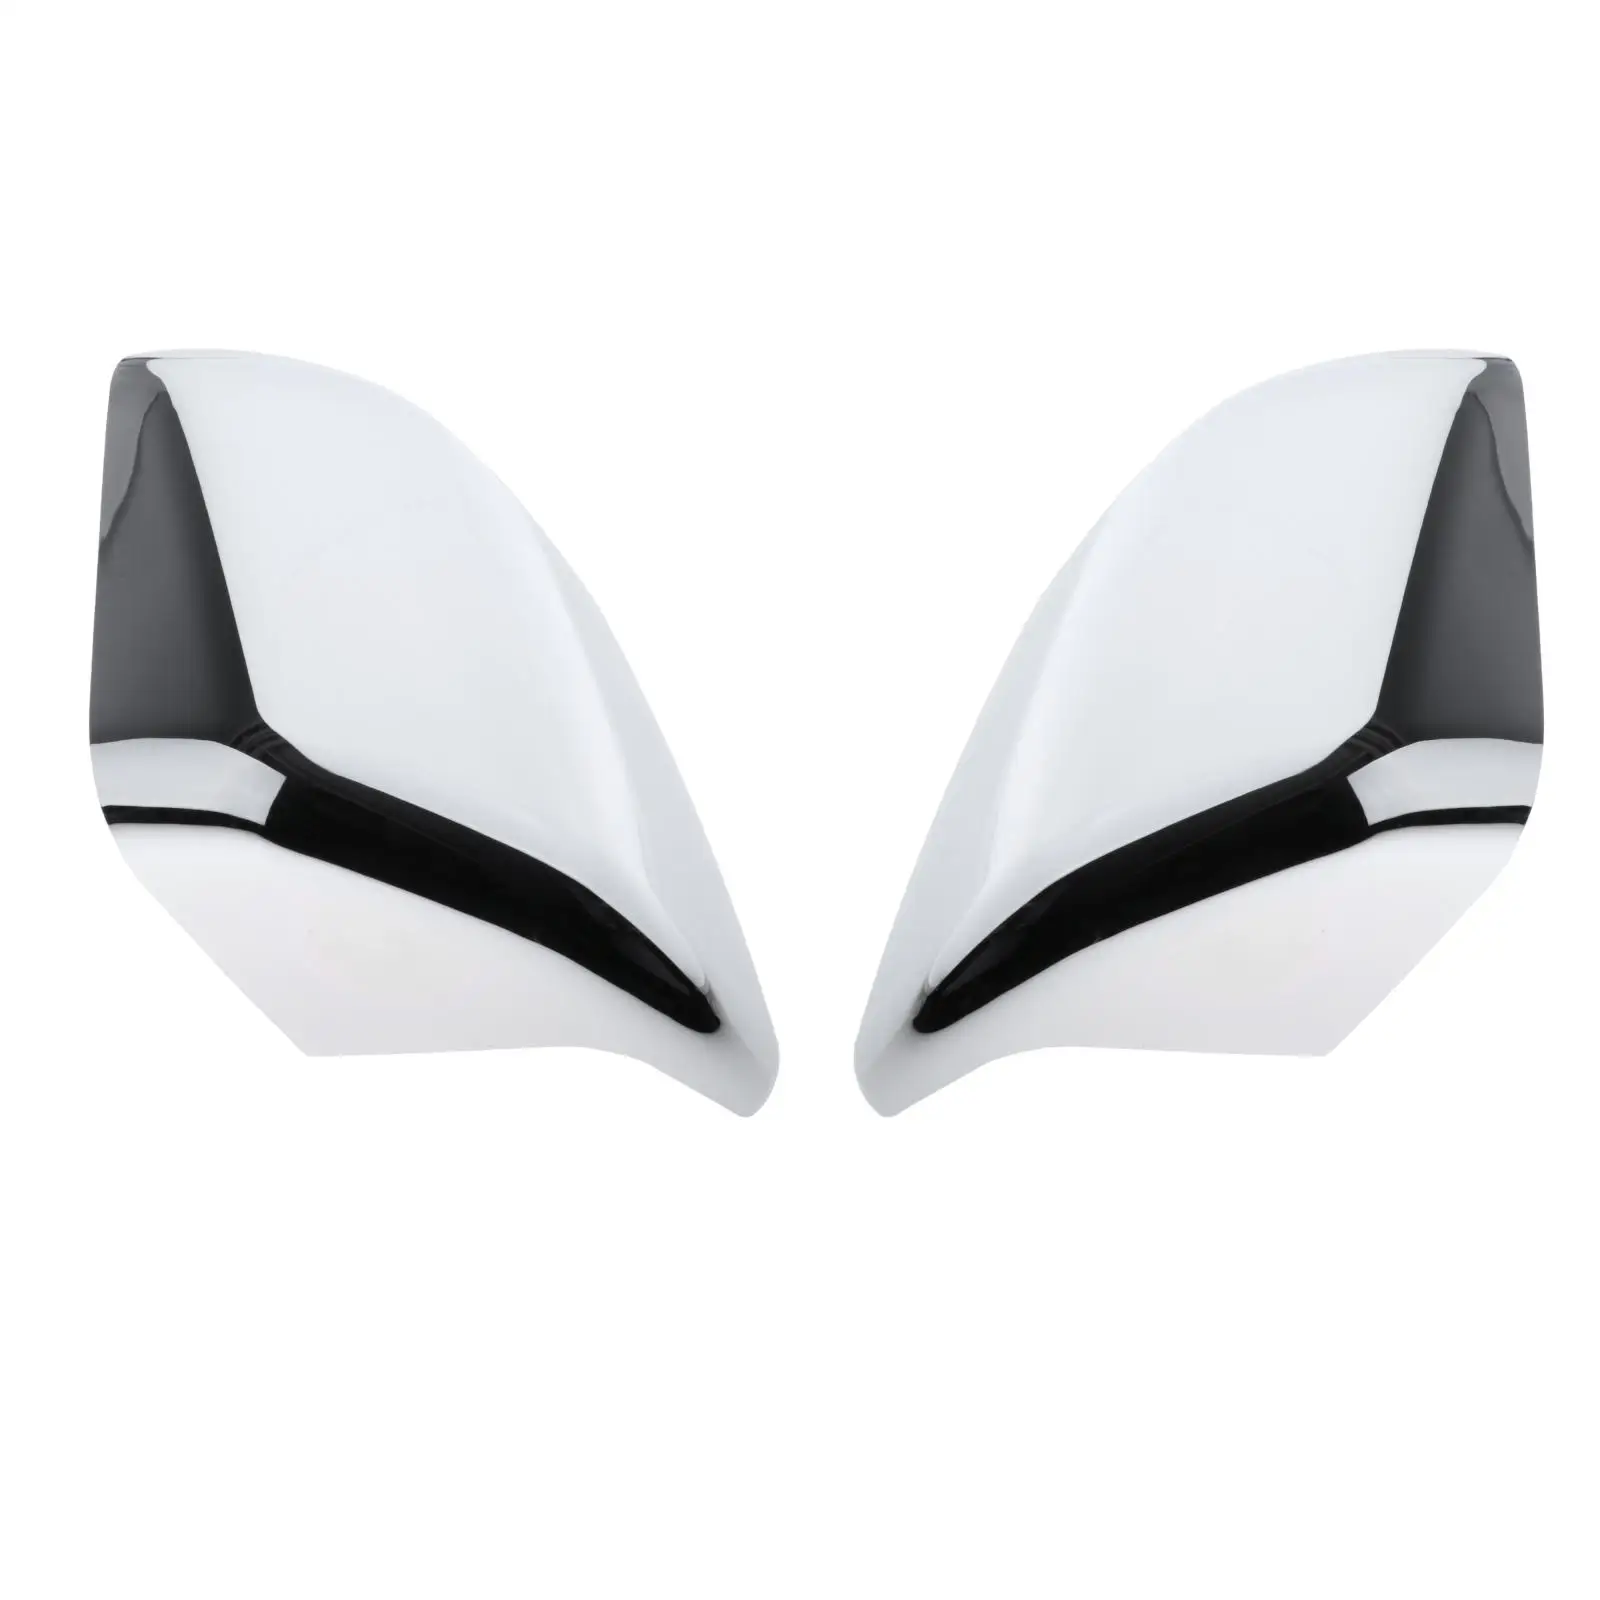 2x Chrome Top Half Mirror Covers Replaces for 2015-2020  F150